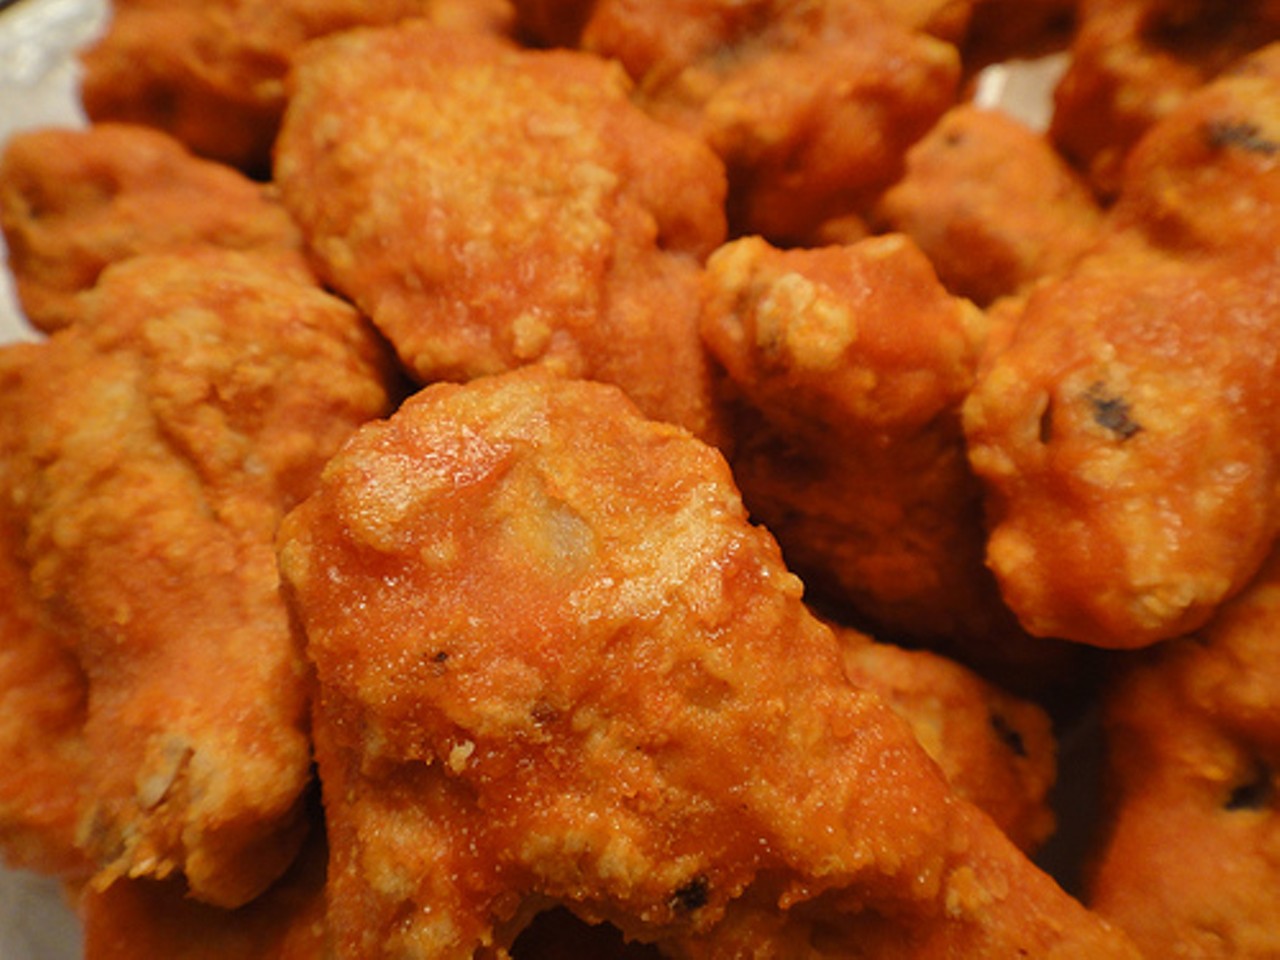 Dina's Pizza & Pub's award winning wings are a staple in Old Brooklyn. They offer over 25 varities of sauces, but you can't go wrong with the hot Carribean-  Just enough island spice. Dina's Pizza & Pub is located at 5701 Memphis Ave. Call 216-351-3663 for more information.